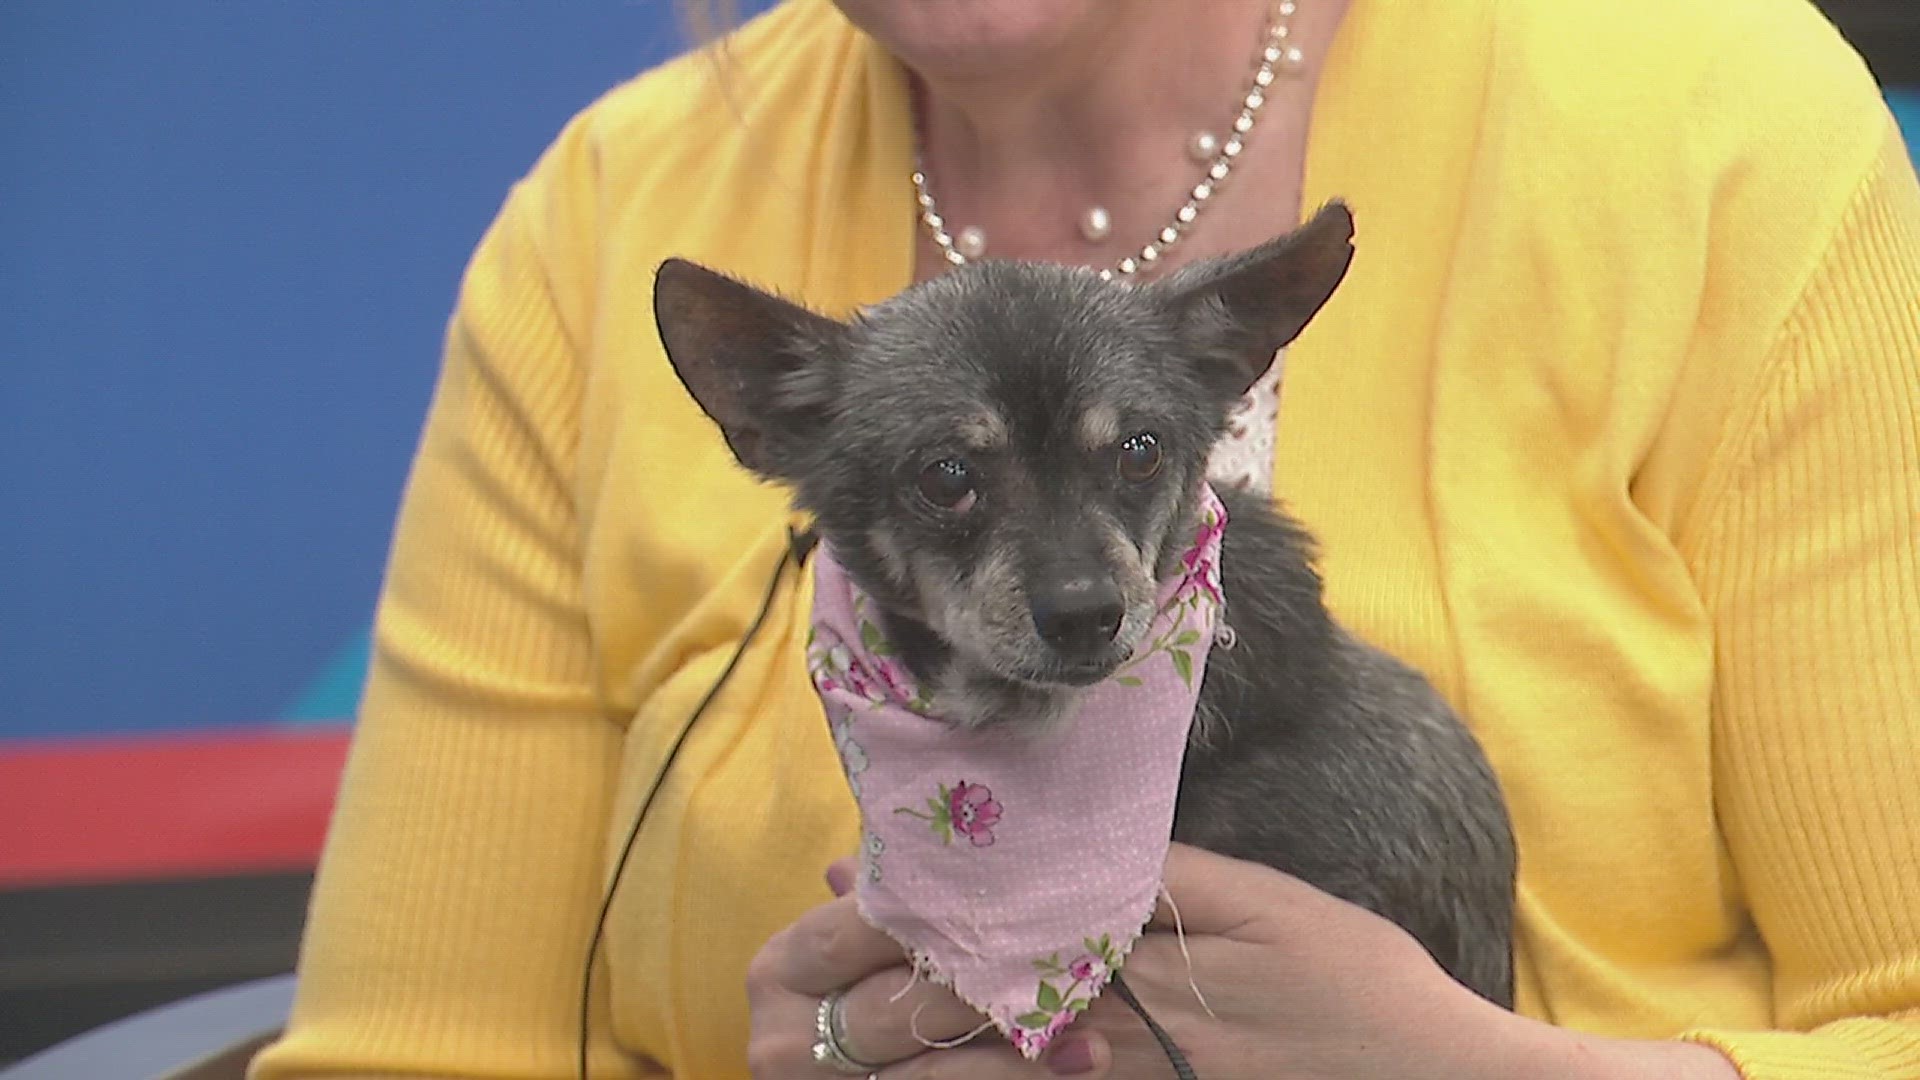 Little Miss was brought to the Quad City Animal Welfare Center from a shelter down south. Don't let her age fool you! She's as sweet as sugar.